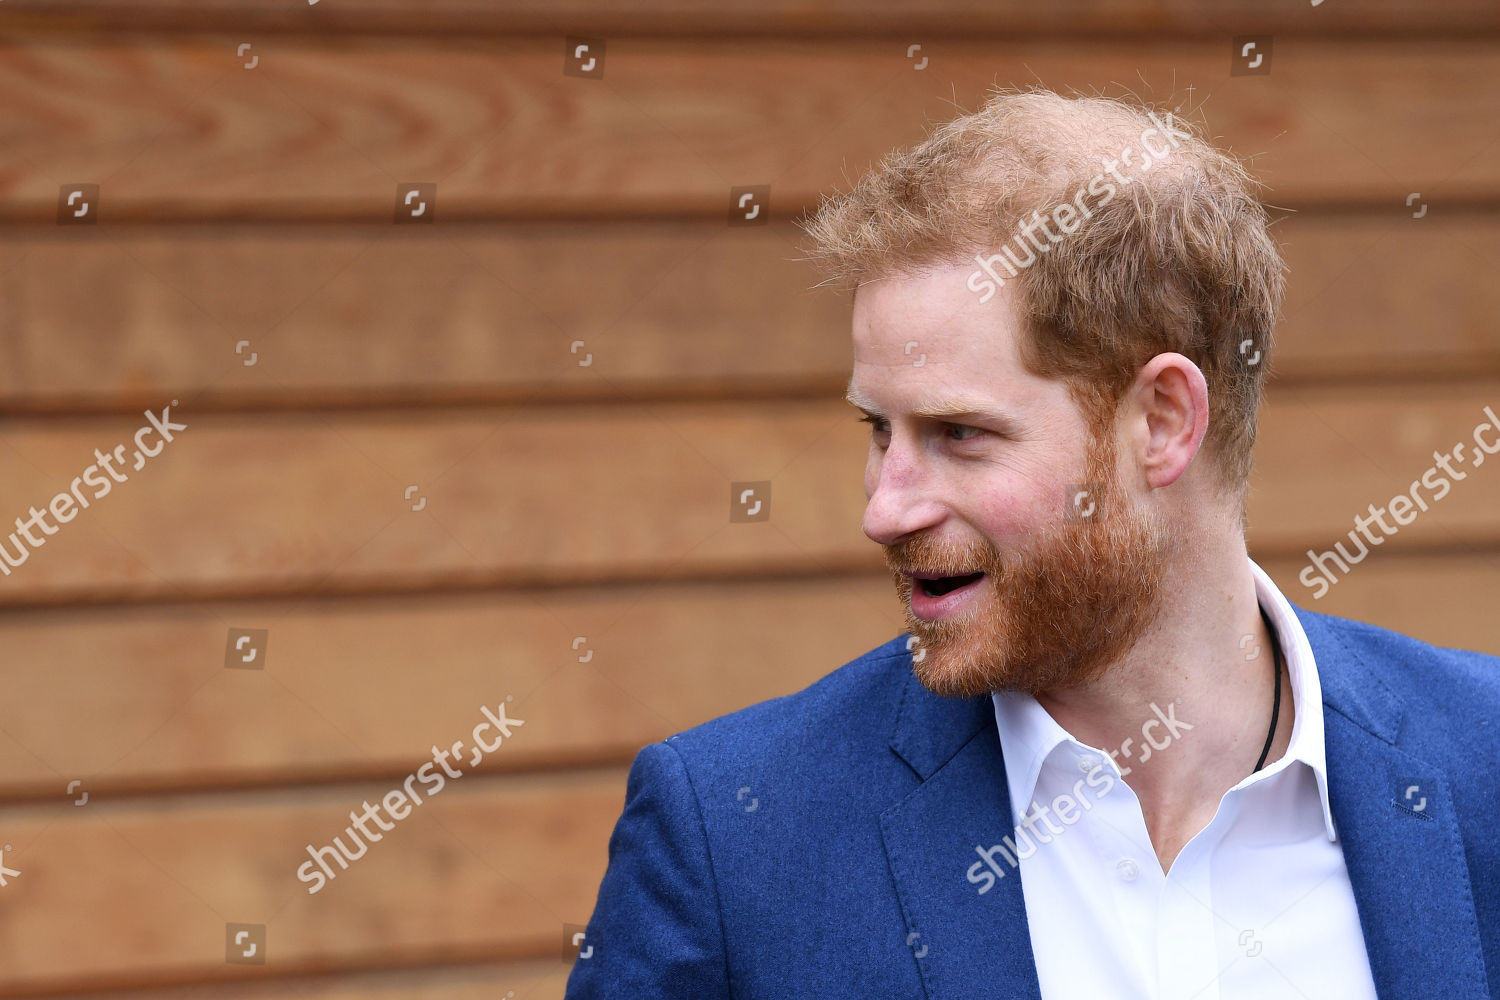 prince-harry-visits-st-vincents-catholic-primary-school-for-commonwealth-canopy-and-woodland-trust-tree-planting-ceremony-london-uk-shutterstock-editorial-10160984as.jpg